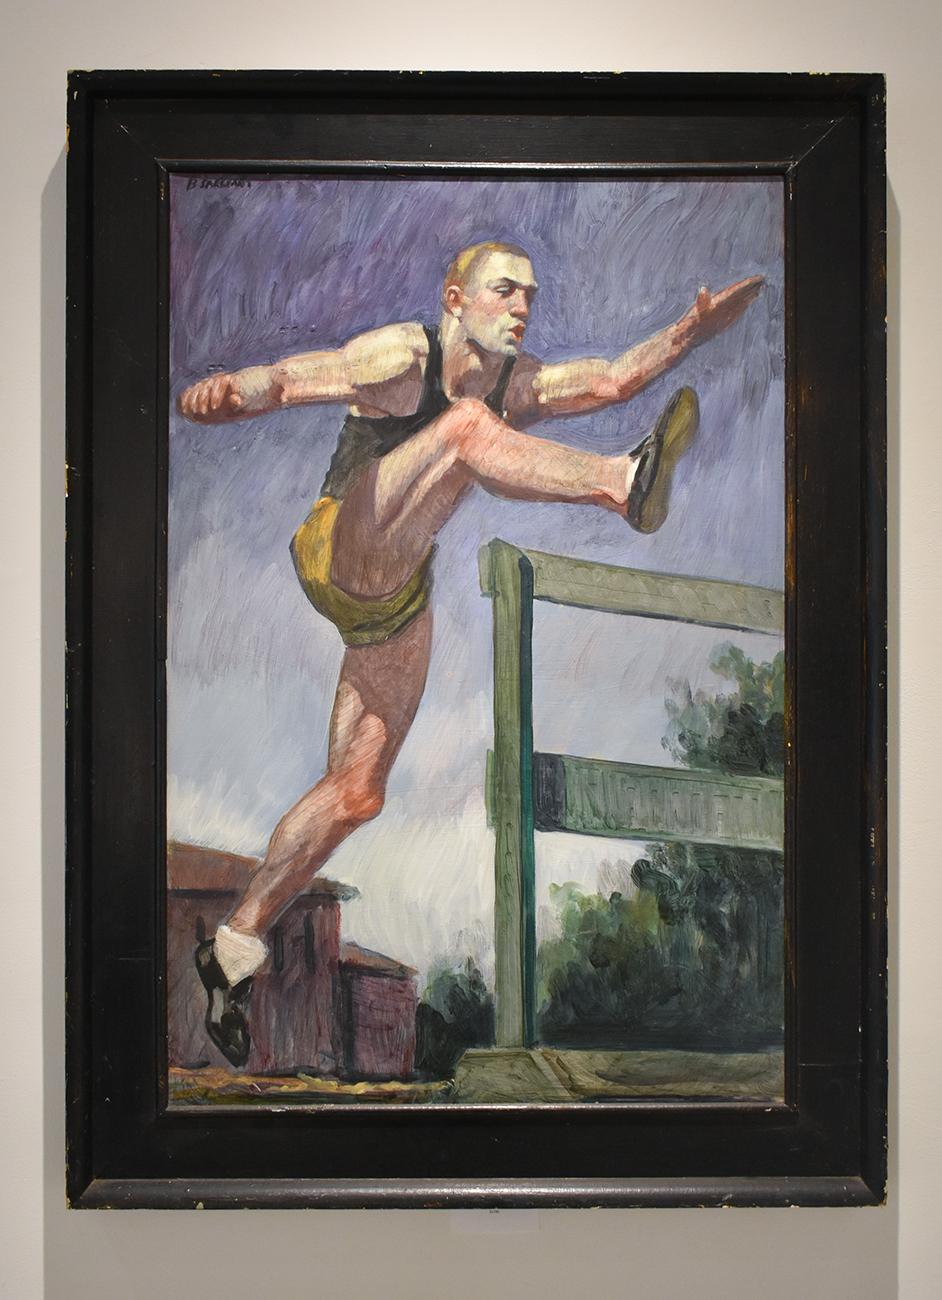 Vertical figurative oil painting of male athlete jumping hurdles
36 x 24 inches, 43 x 31 x 2.5 inches in distressed black painted wood frame
Signed, verso & front (Mark Beard, aka. Bruce Sargeant)

This vertical, contemporary figurative painting of